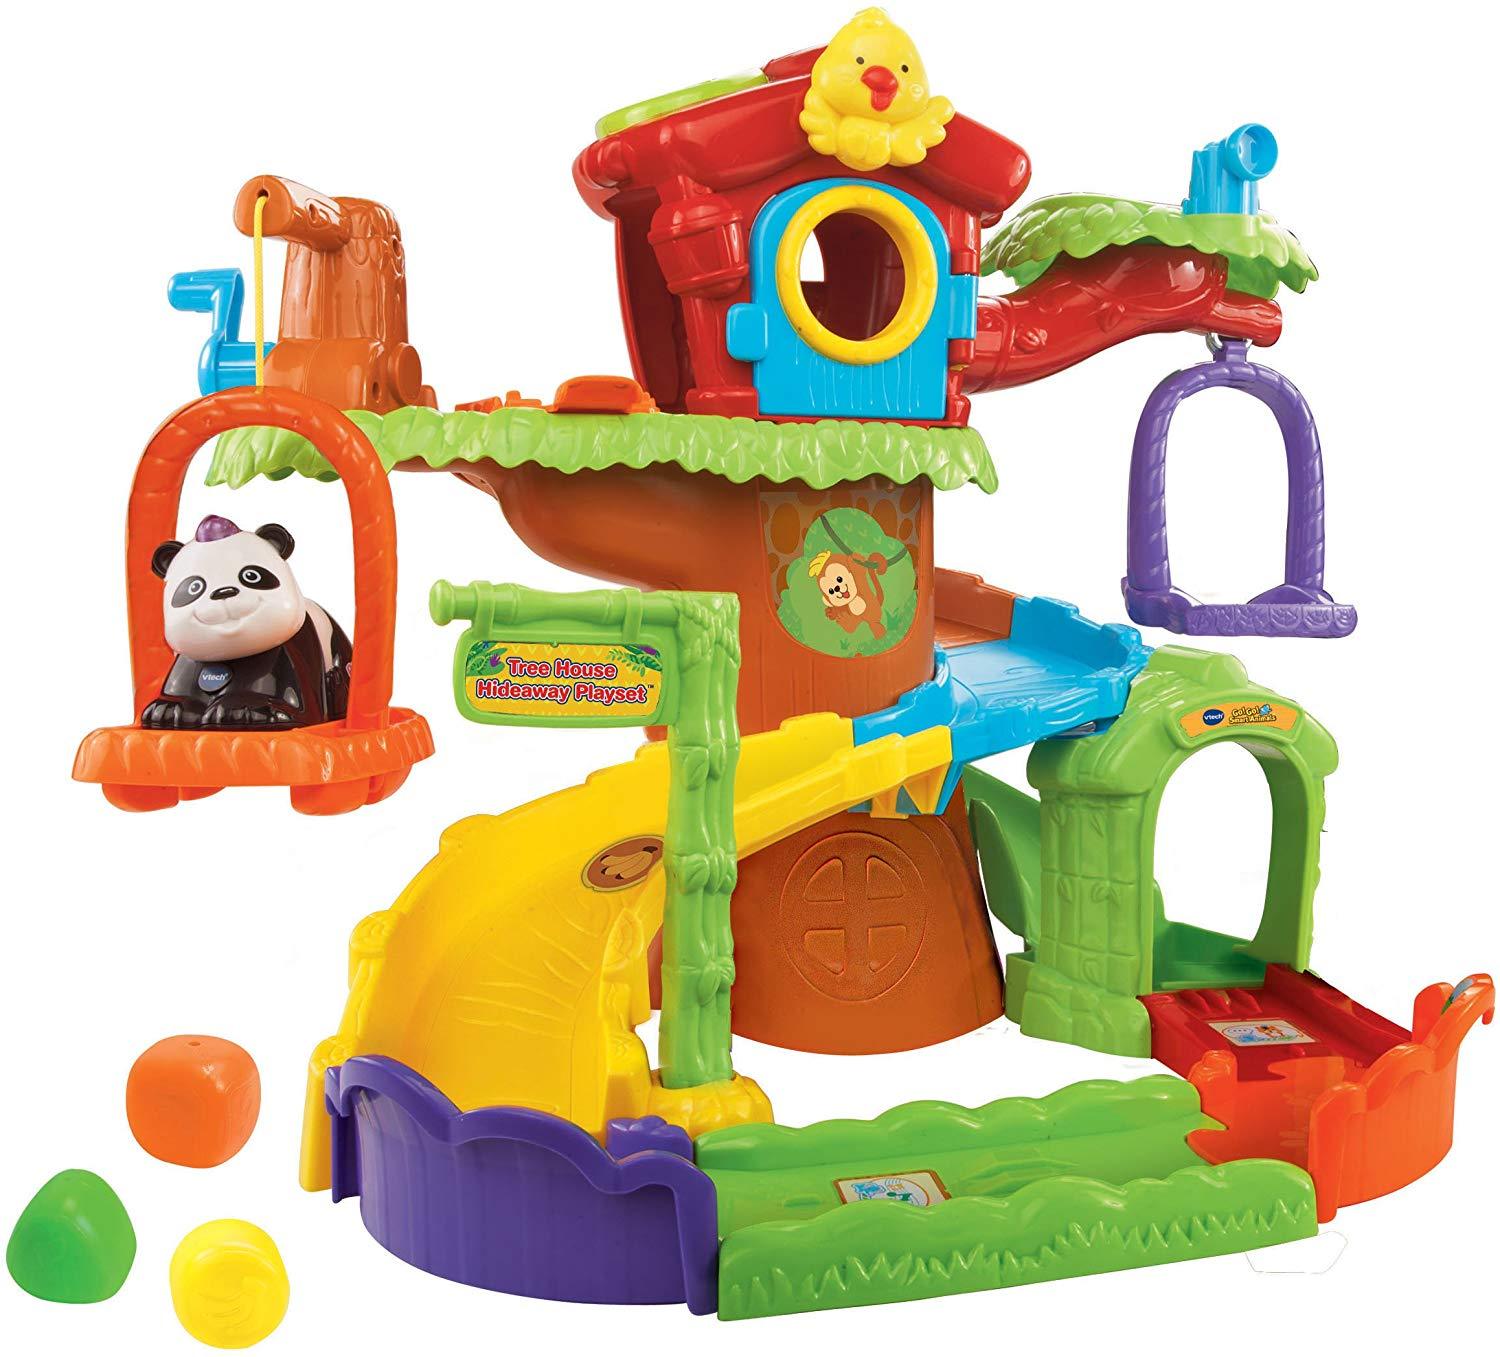 VTech Go! Go! Smart Animals Tree House Hideaway Play Set - image 2 of 4